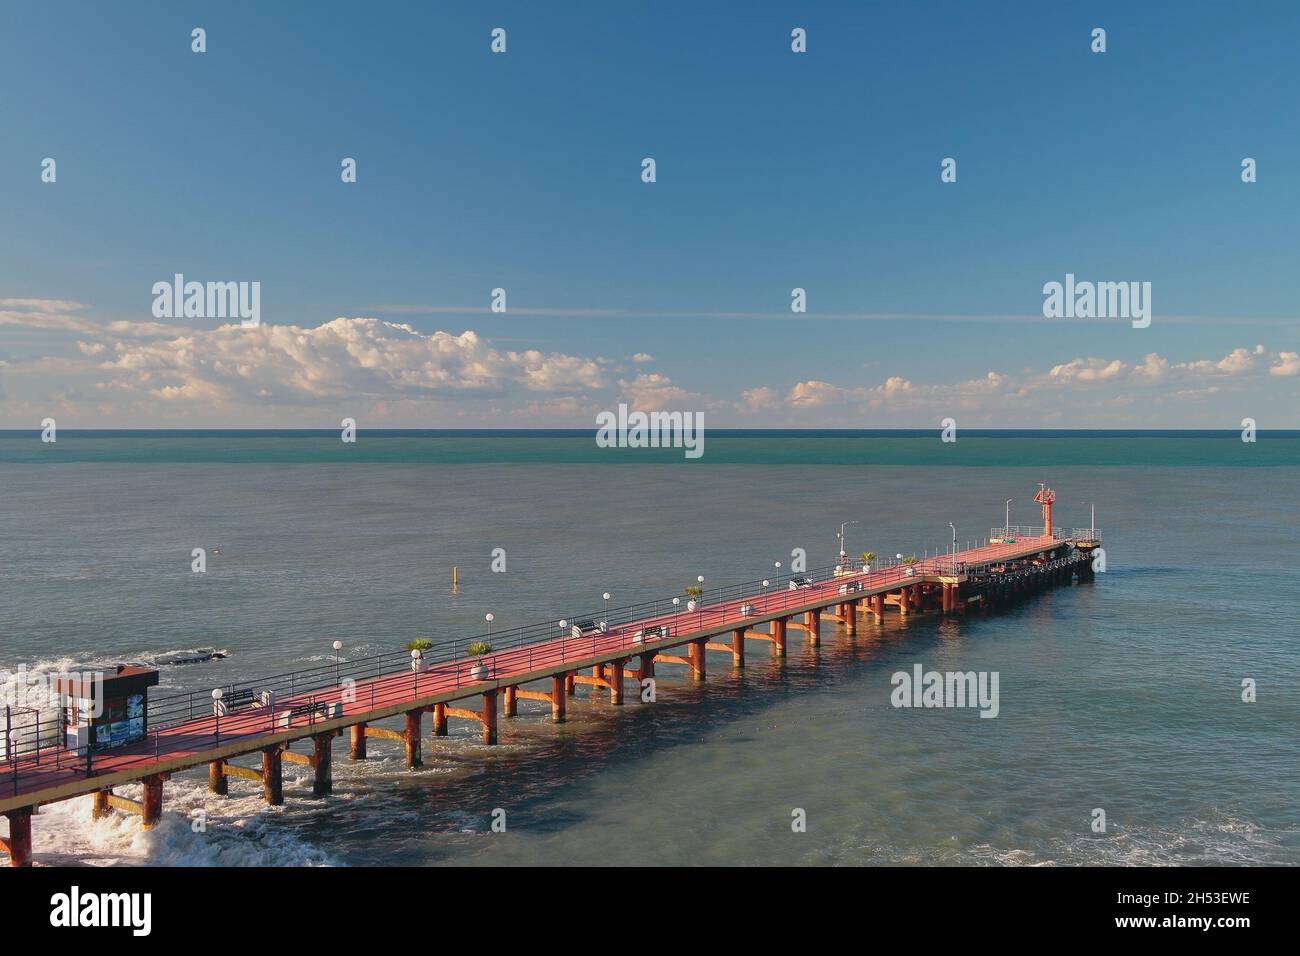 Pier and sea after last night's storm. Adler, Sochi, Russia Stock Photo